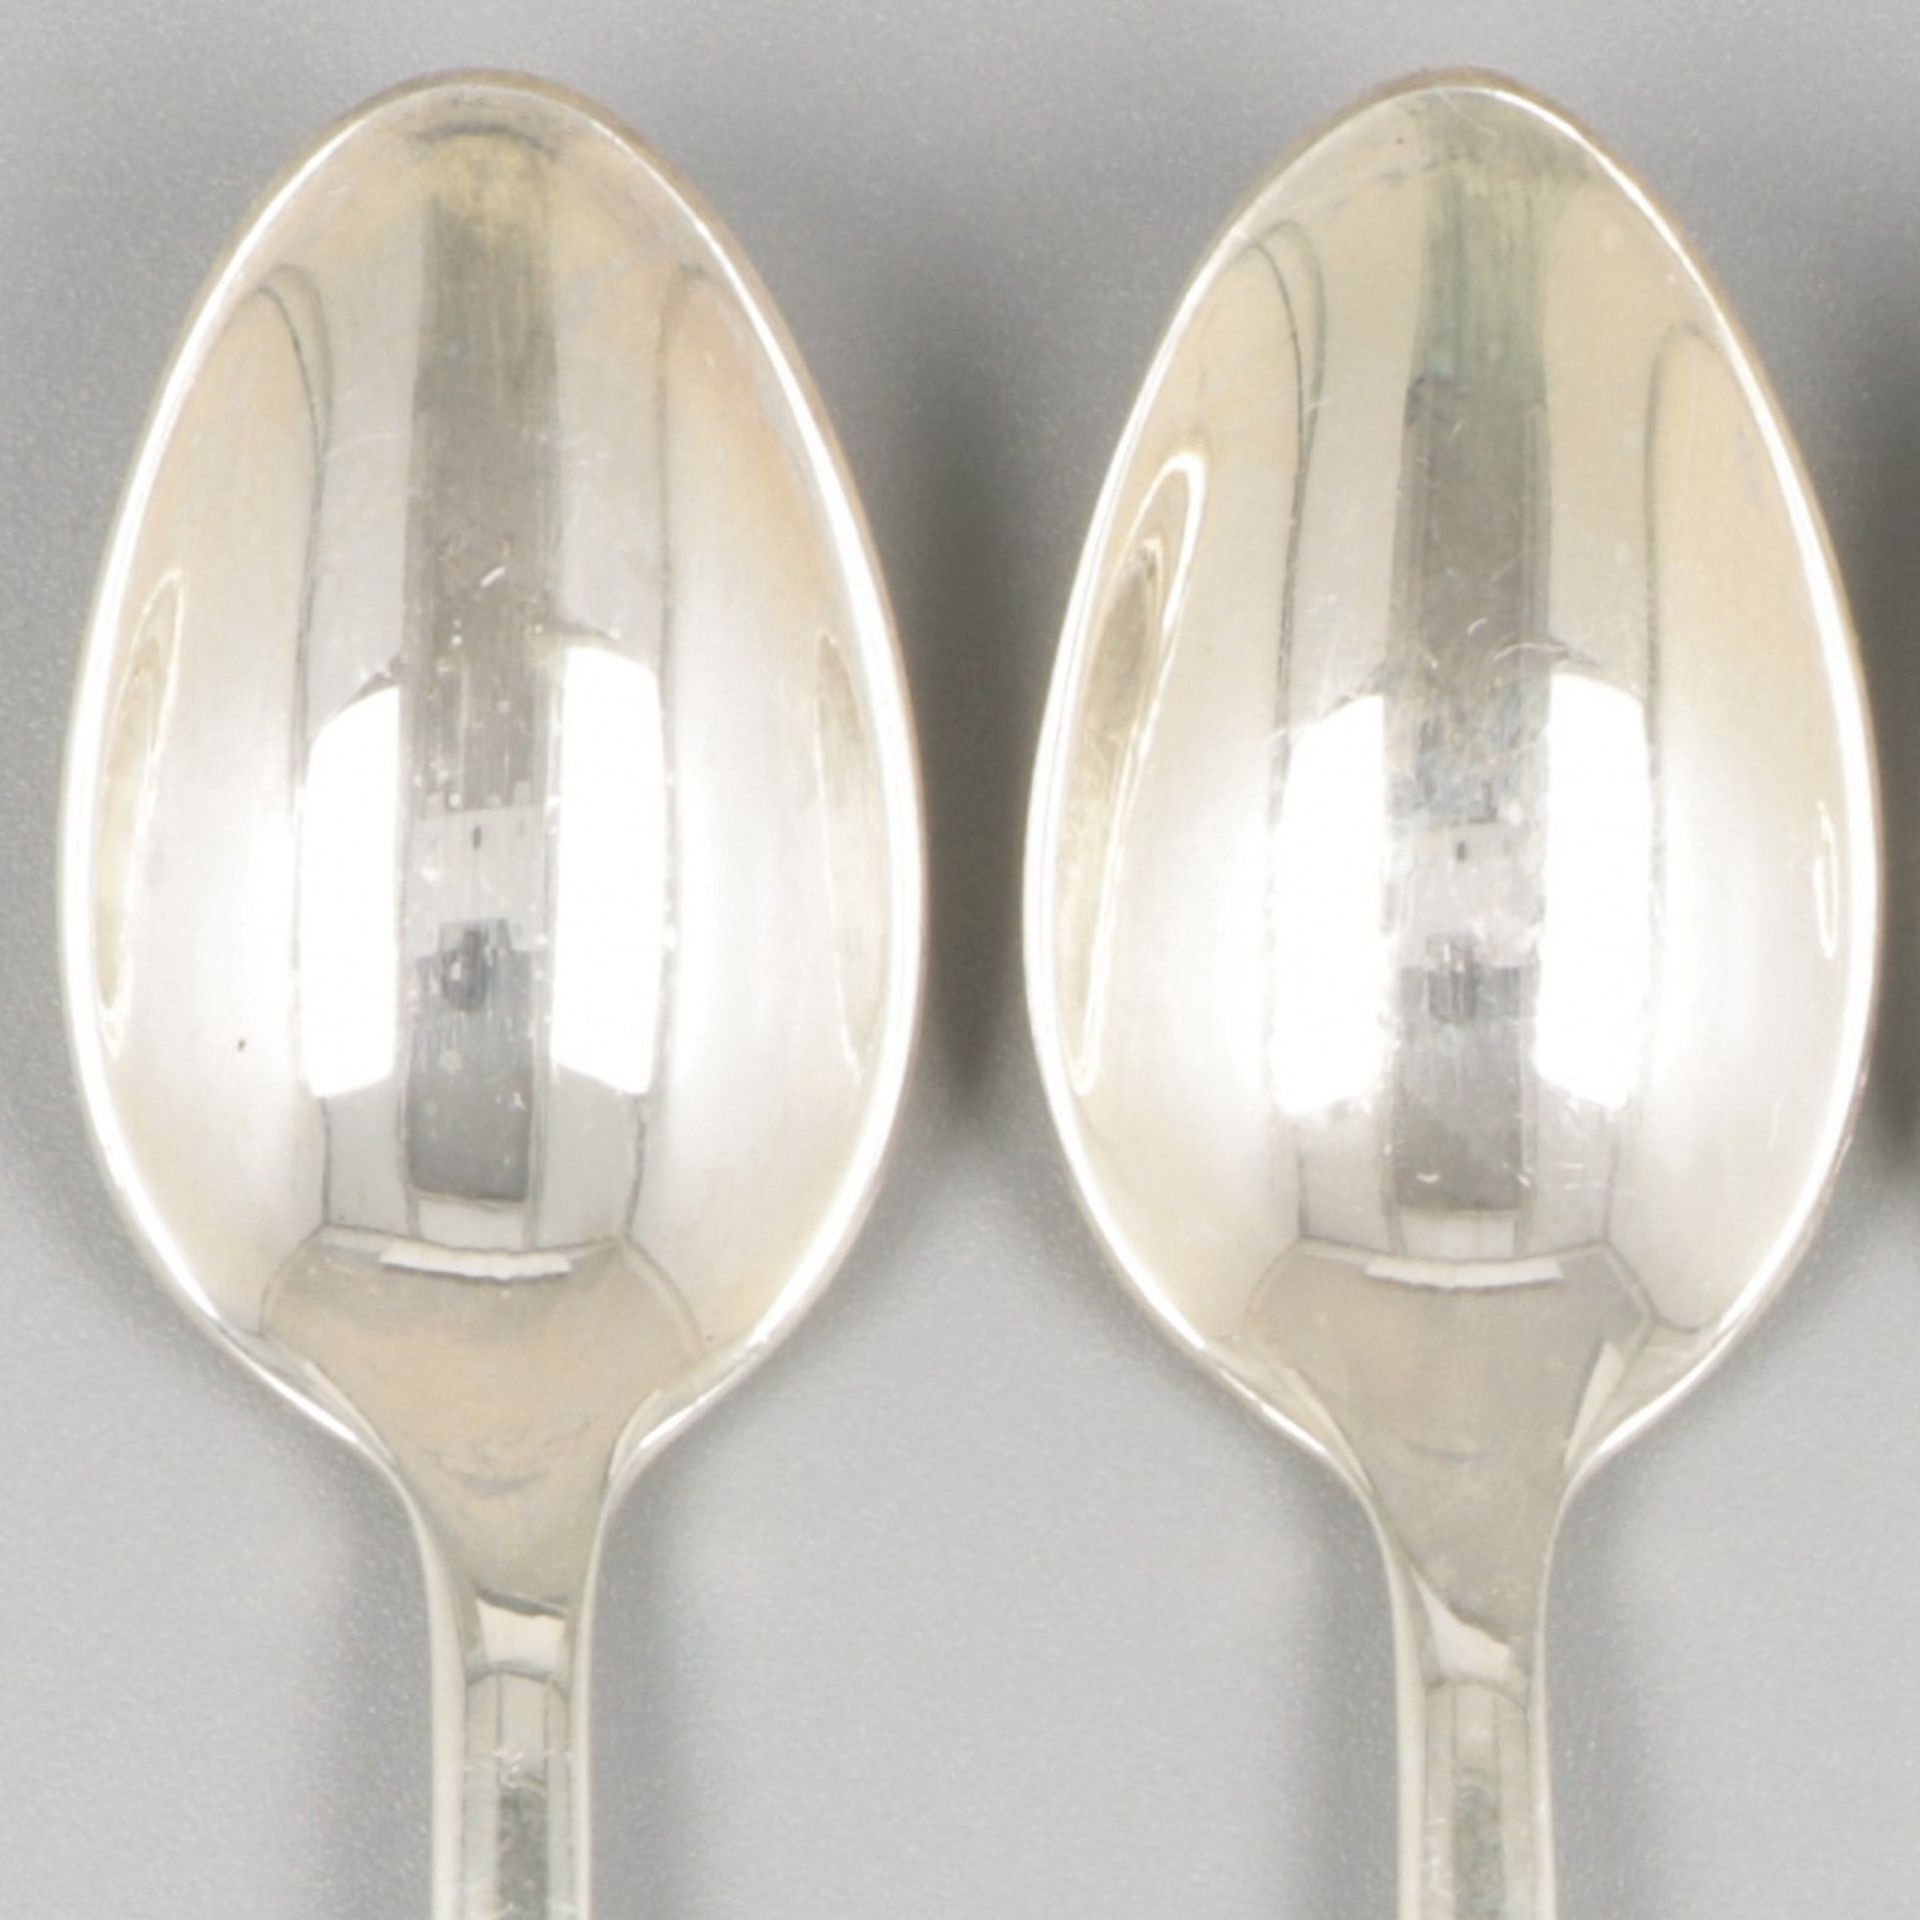 6-piece set coffee spoons ''Haags Lofje'' silver. - Image 3 of 5